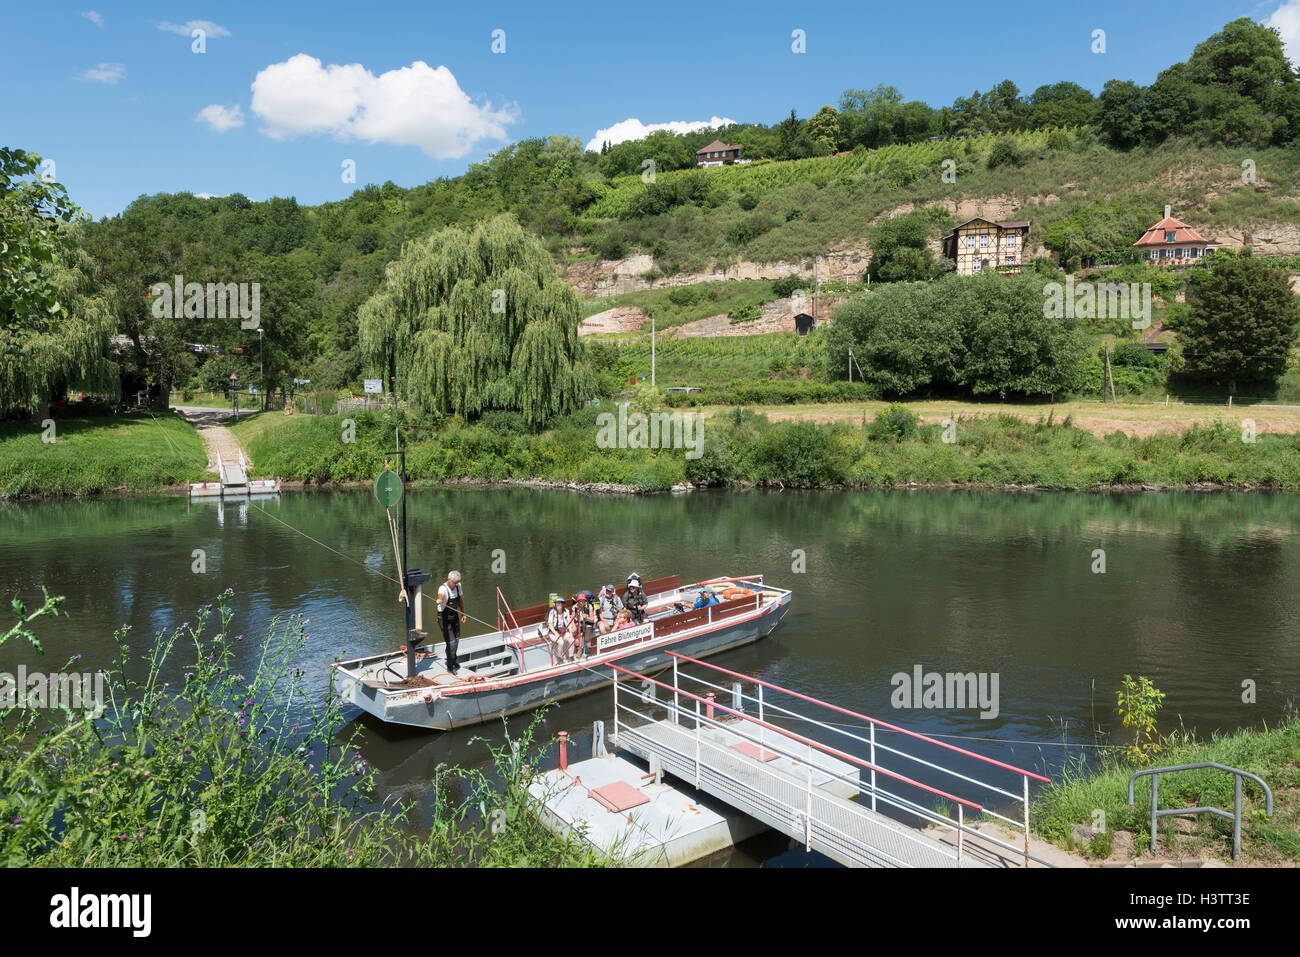 Traditional reaction ferry on the river Saale, rope drawn by the ferryman, vineyards behind, Naumburg, Saxony-Anhalt, Germany Stock Photo